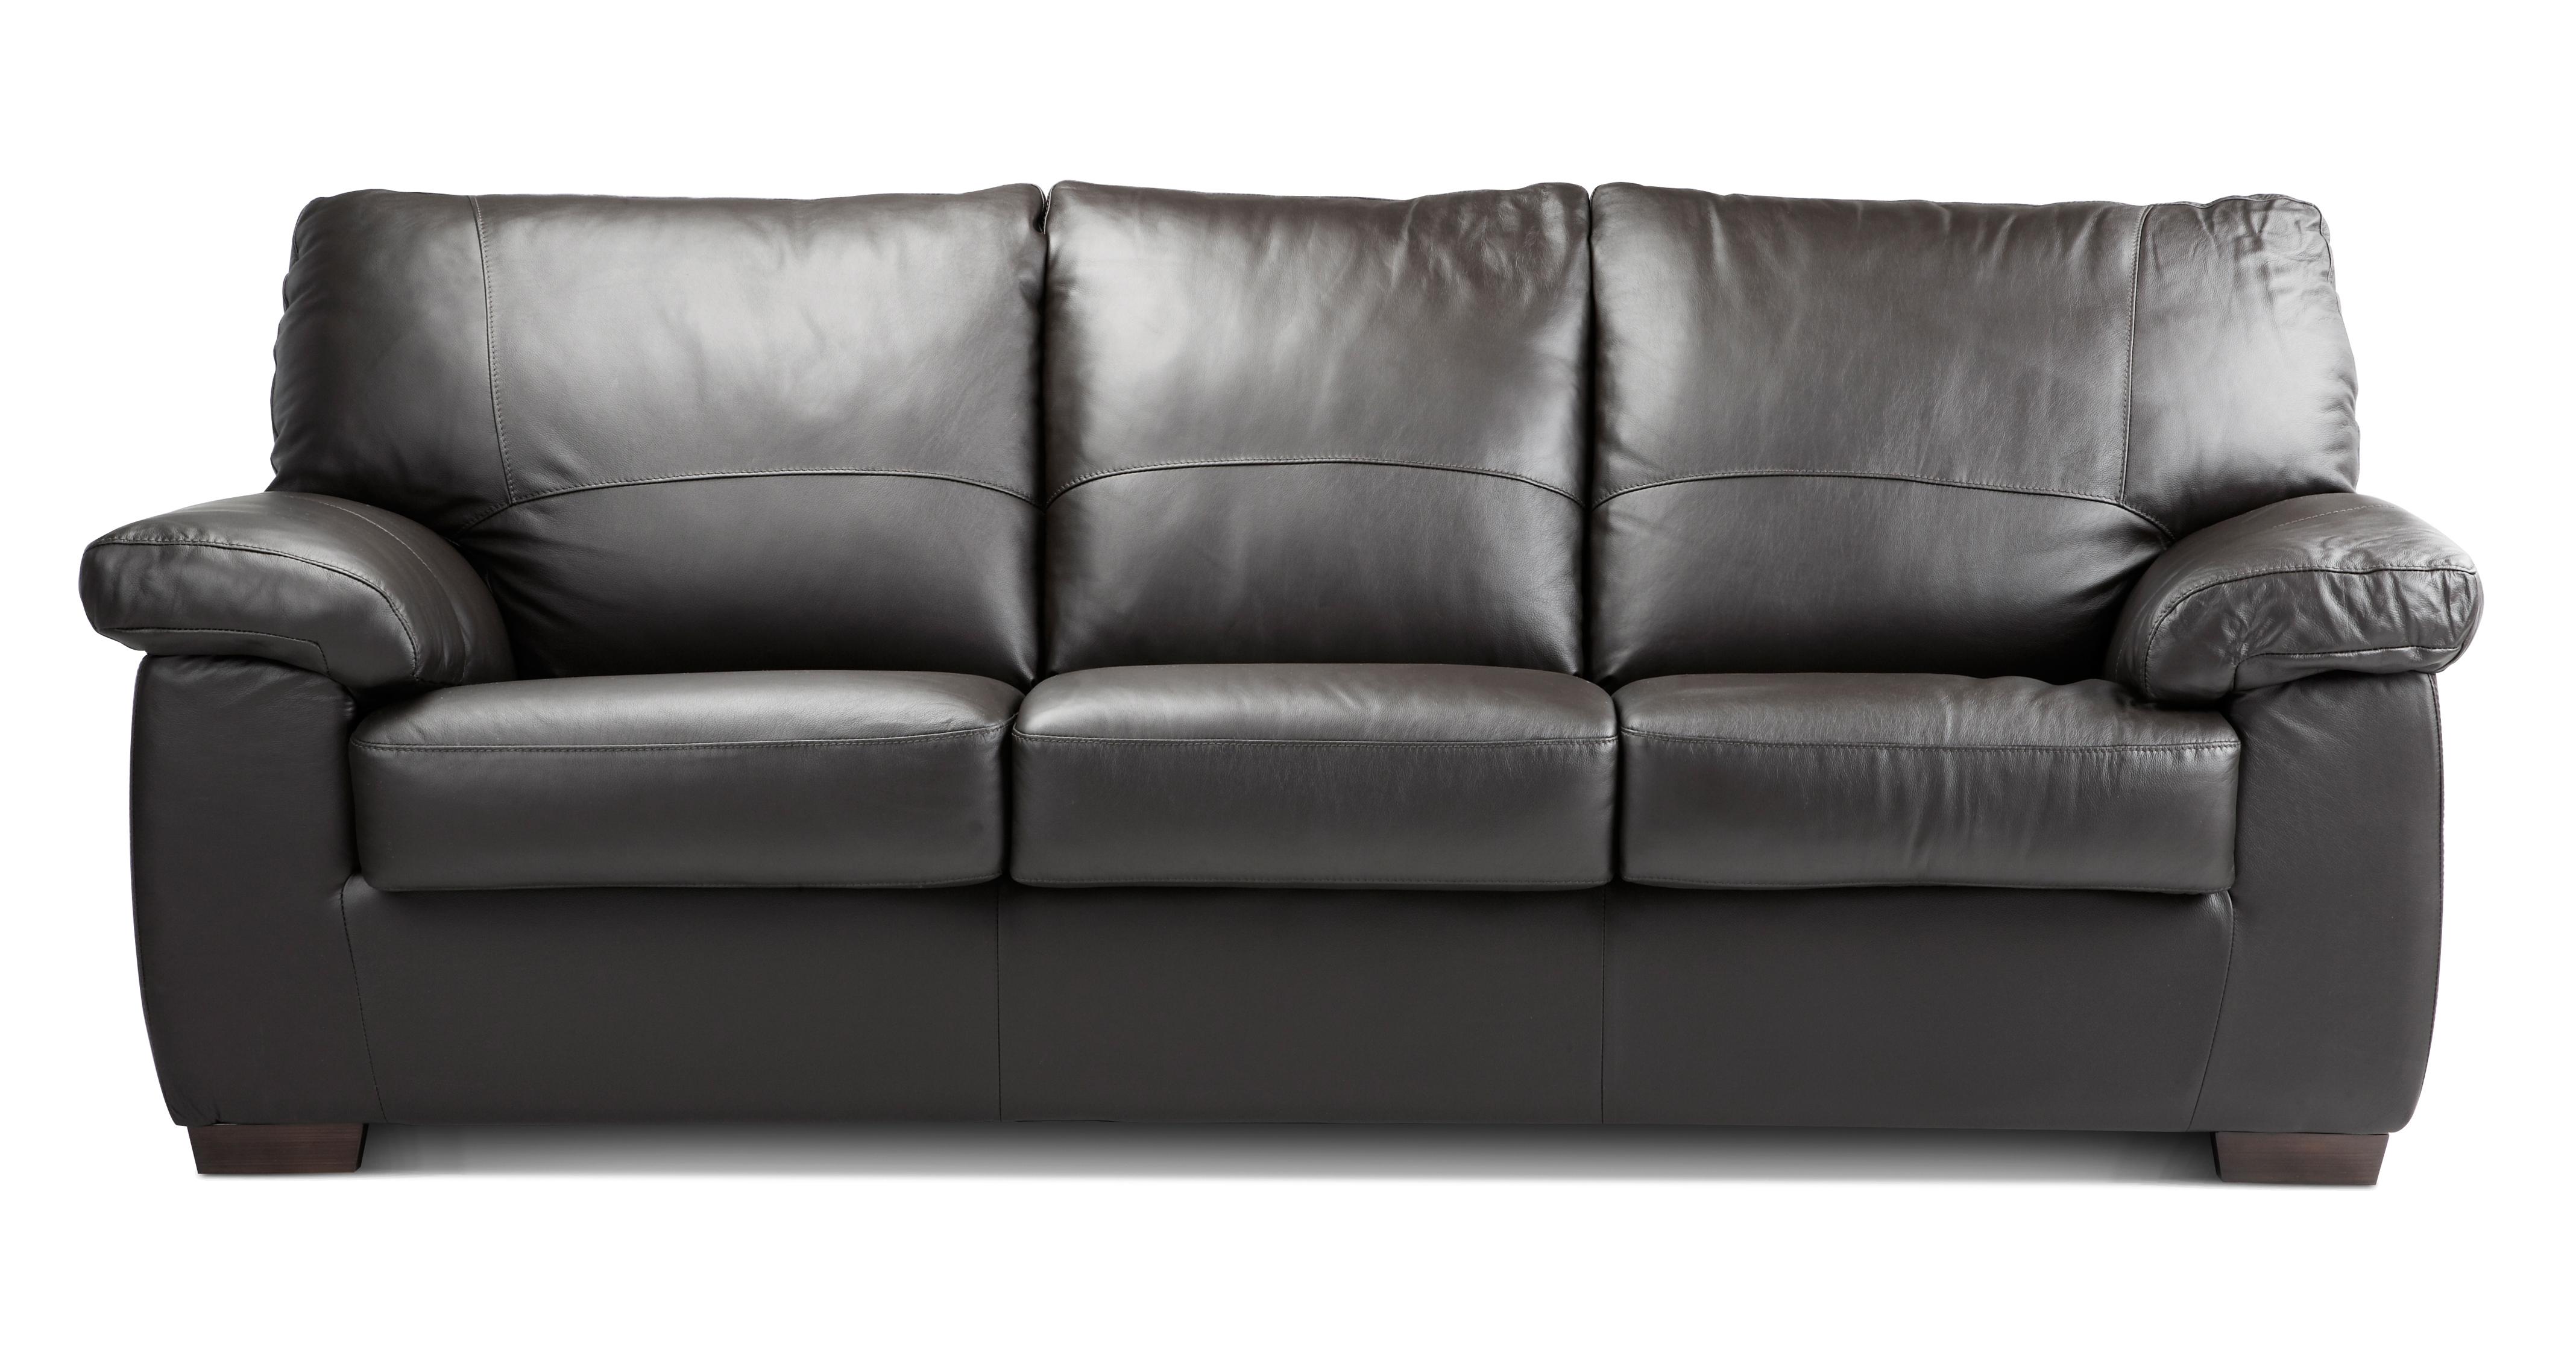 Pavilion Leather And Leather Look 3 Seater Deluxe Sofa Bed